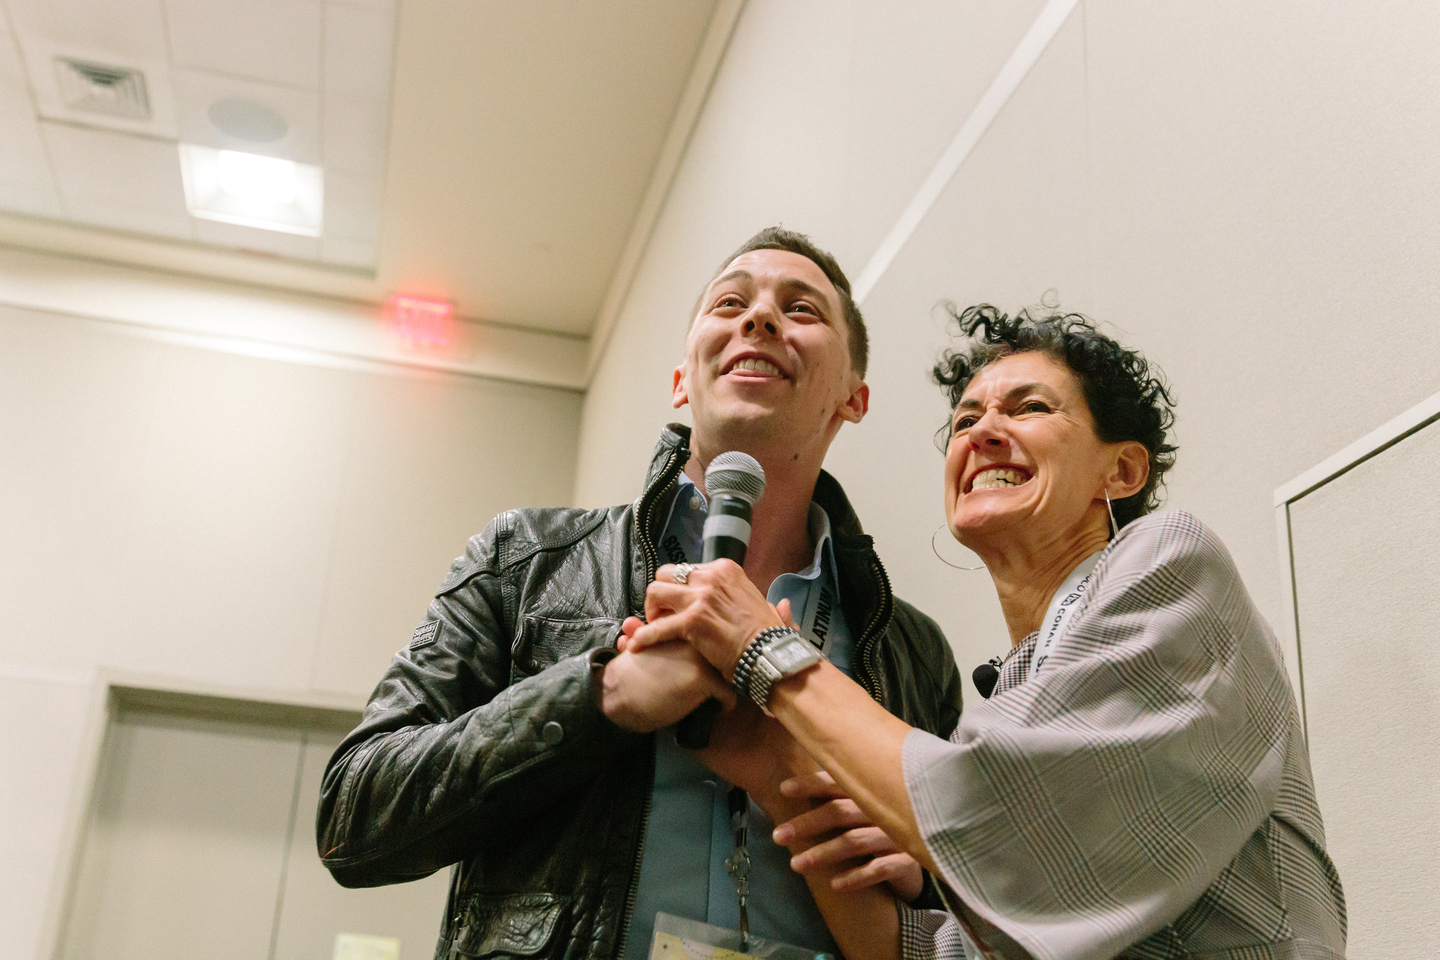 Nancy Giordano hands the mic to an audience member during the Write The Future Now! Q&A – Photo by Rey Romo